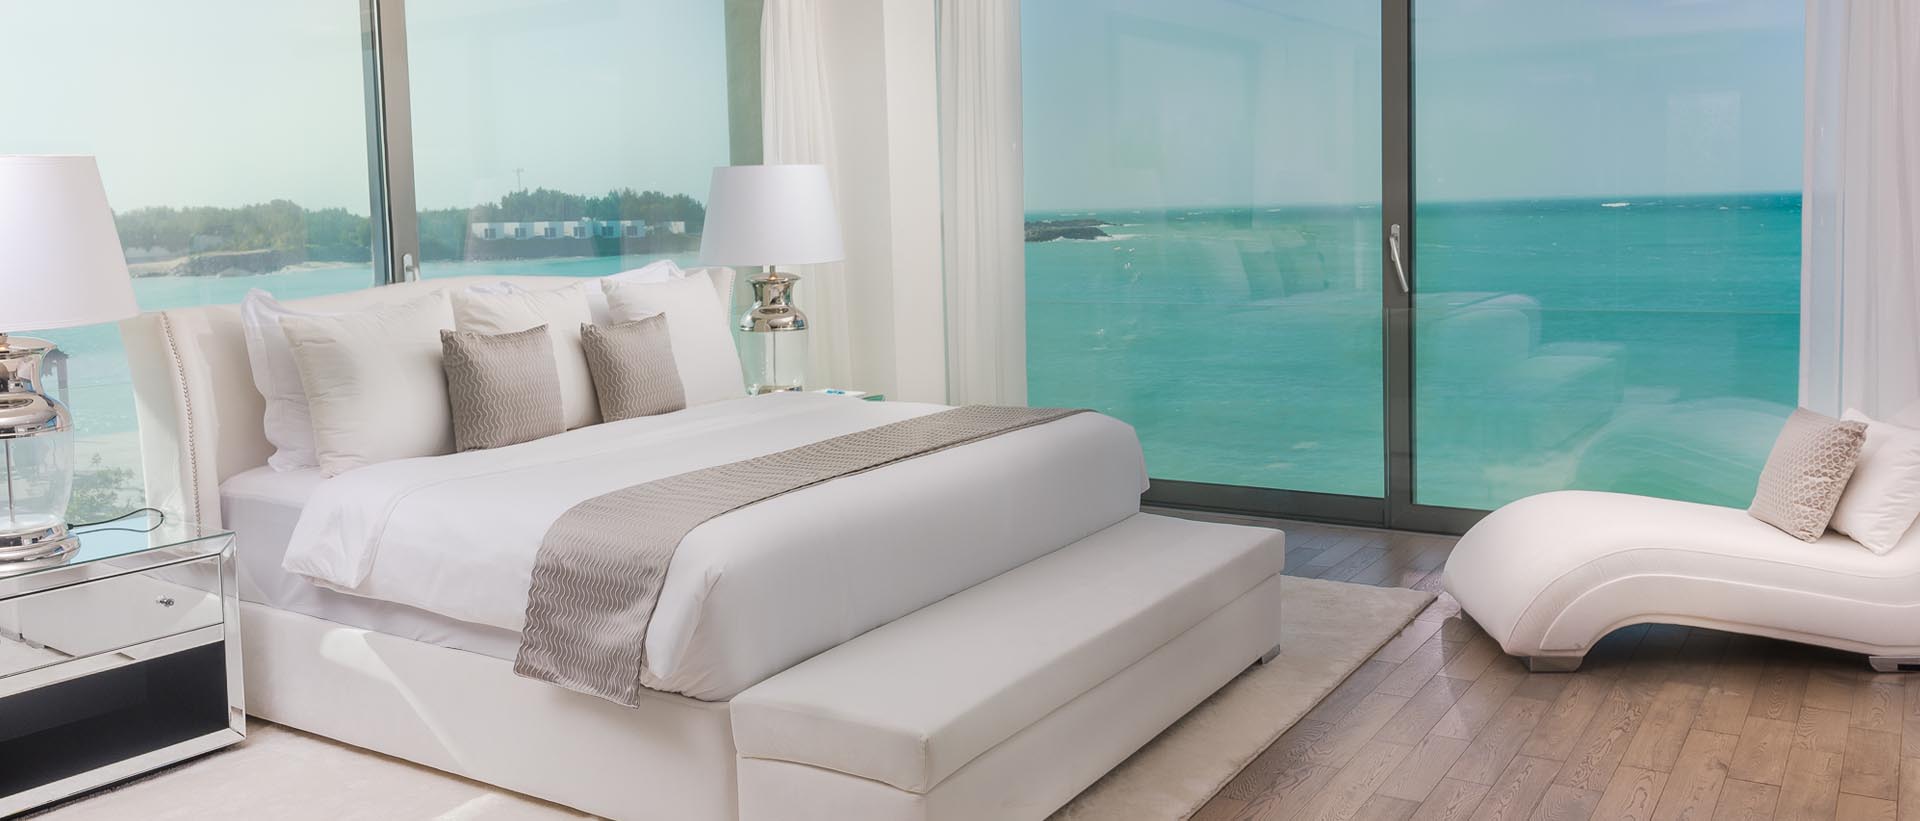 UPSTAIRS DREAM MASTER BEDROOM WITH KING BED AND TURQUOISE OCEAN VIEW